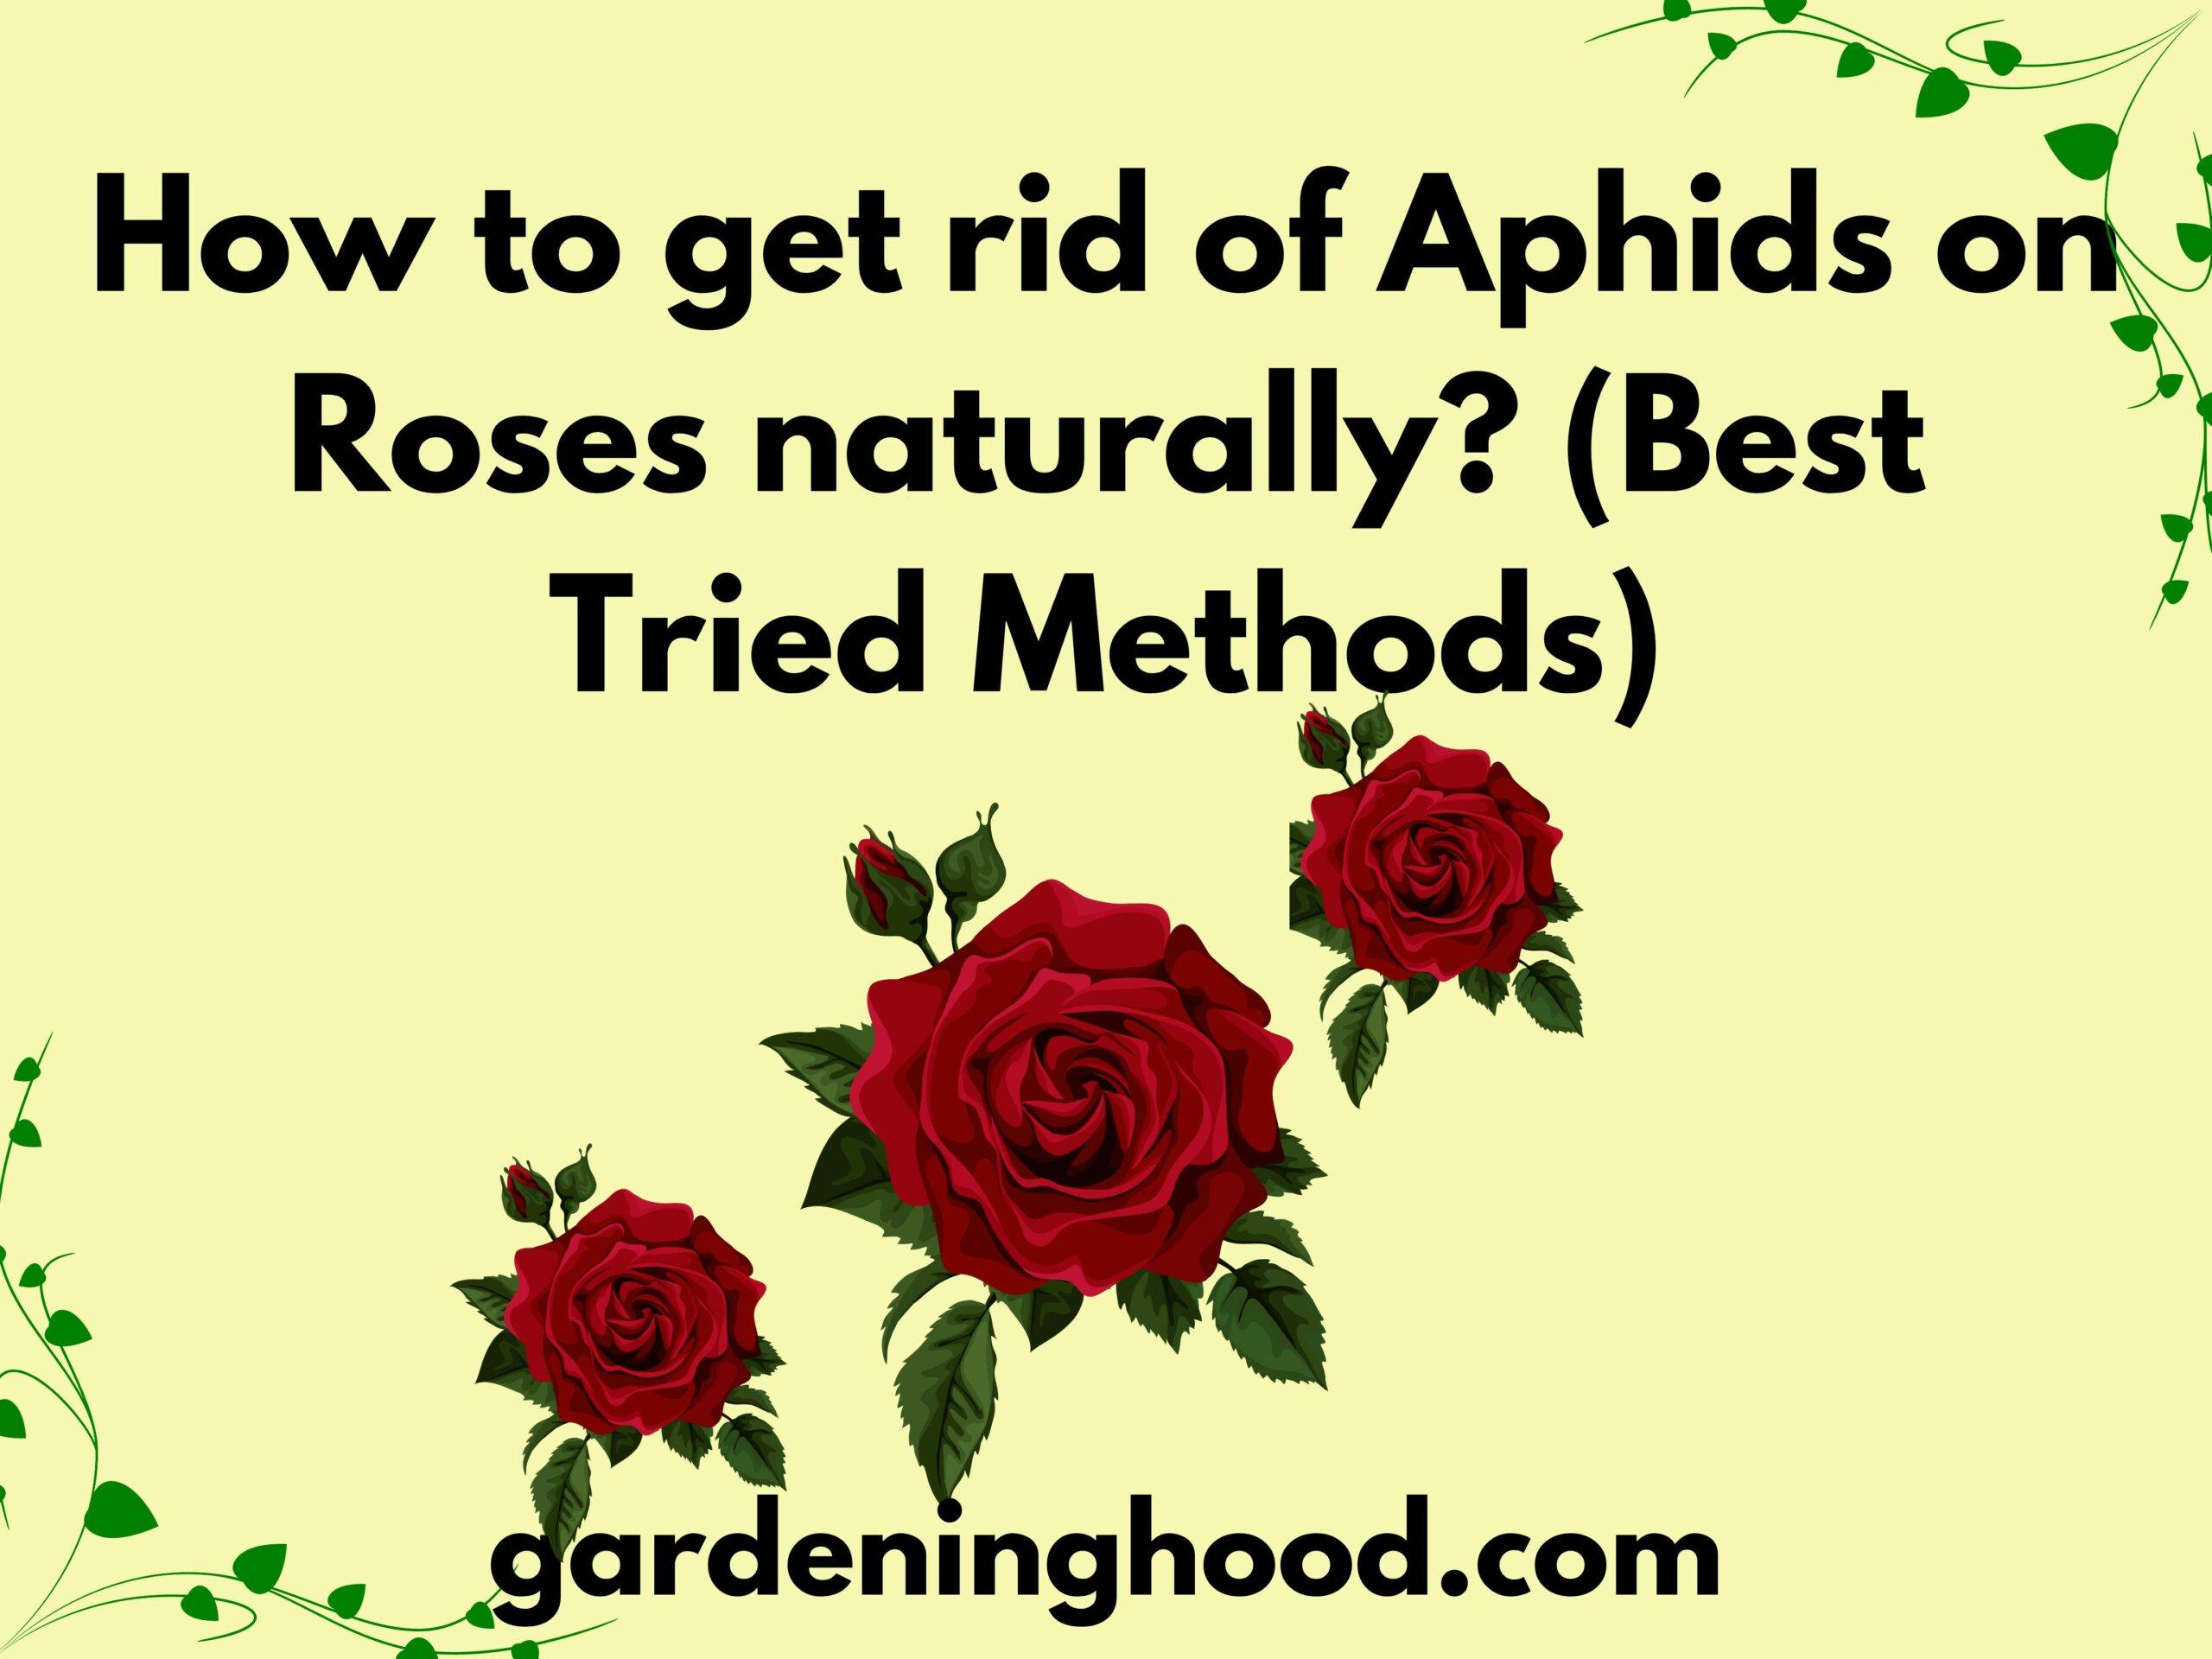 How to get rid of Aphids on Roses naturally? (Best Tried Methods)